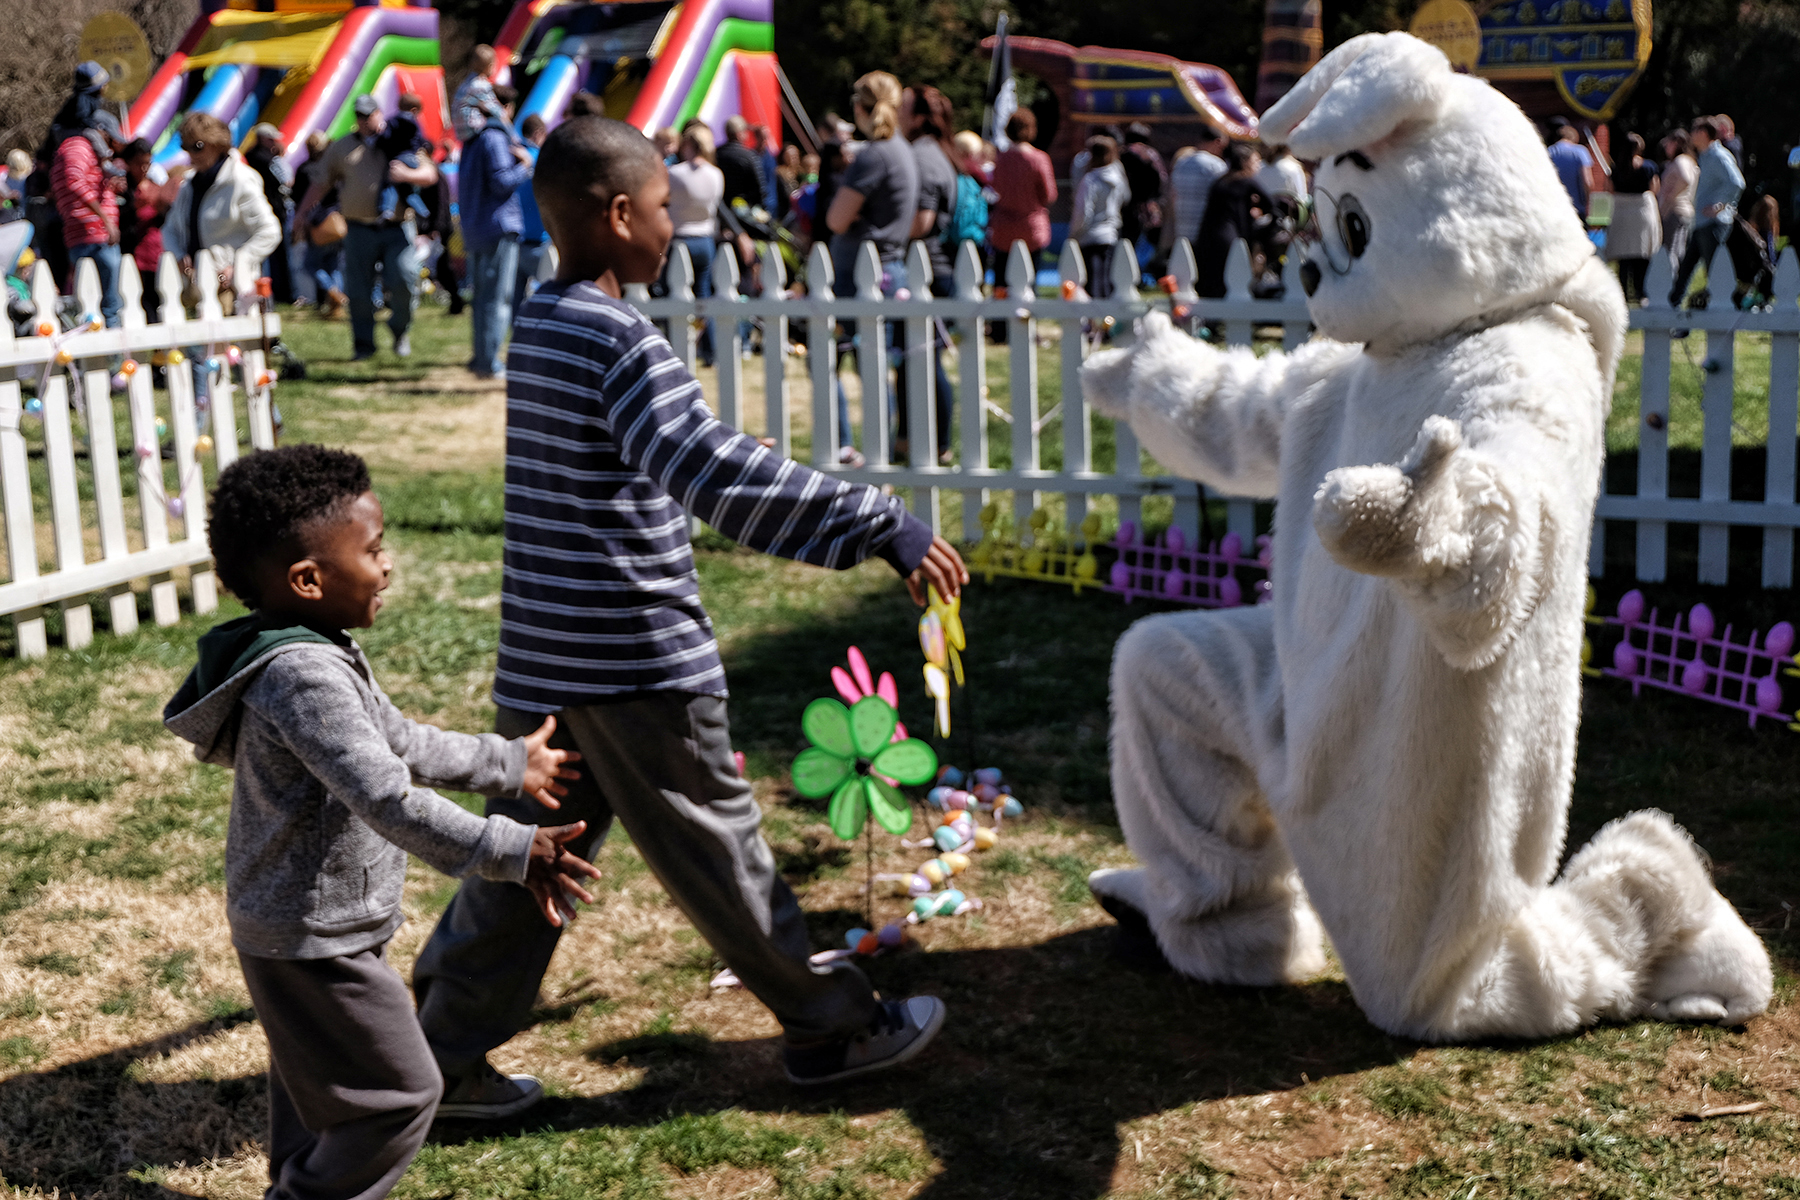 Family Easter at Maymont and Easter on Parade highlight season this